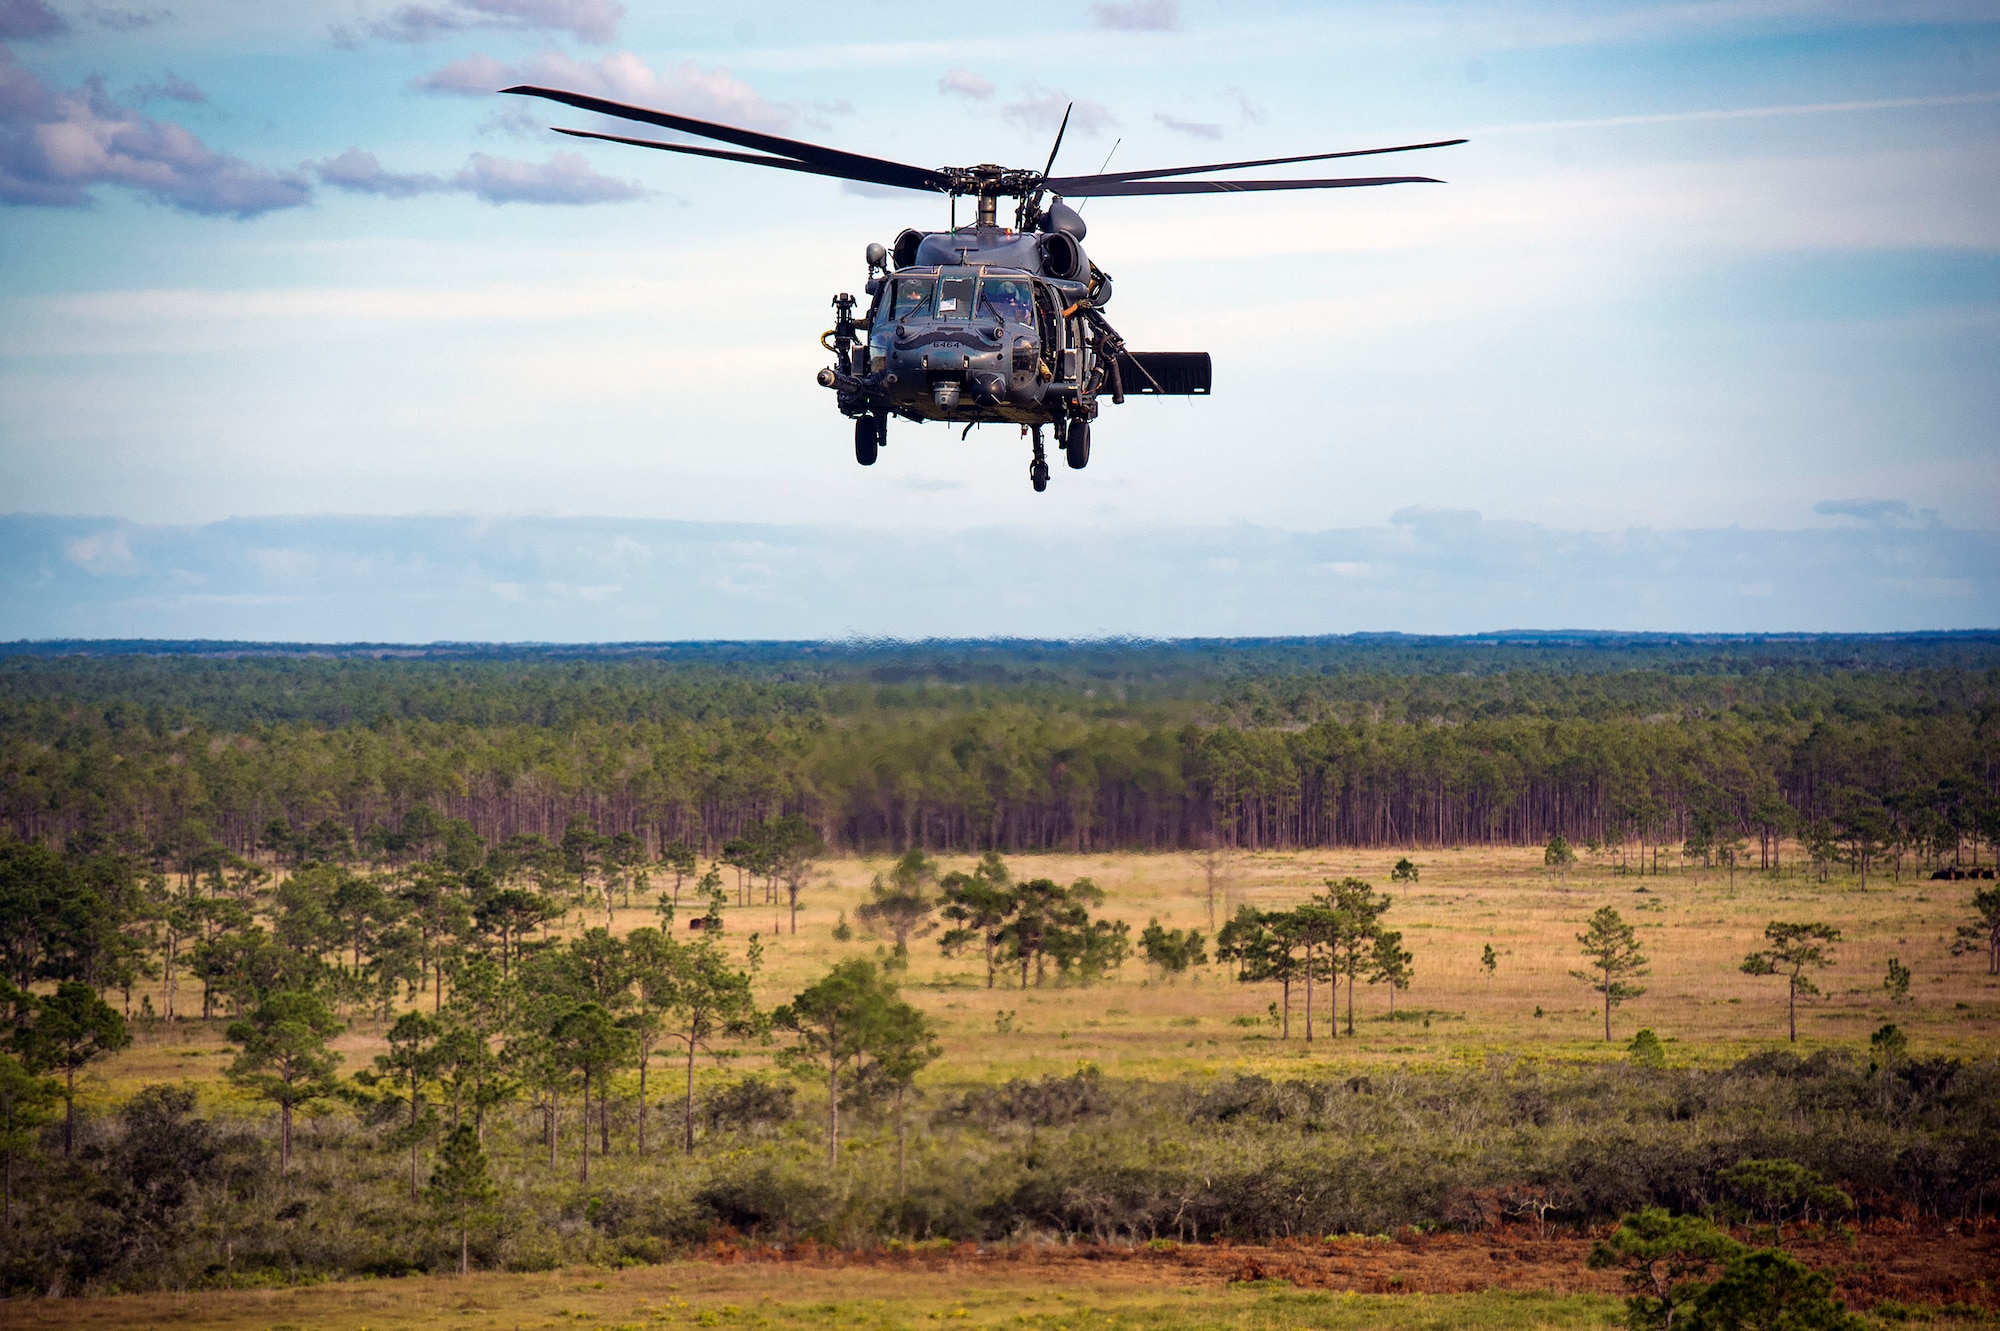 A 41st Rescue Squadron HH-60G Pave Hawk navigates over a mock battlefield during pre-deployment ‘spin-up’ training, Dec. 12, 2018, at Avon Park Air Force Range, Fla. During this pre-deployment ‘spin-up’ training, Moody’s 347th Rescue Group tested and maximized their combat search and rescue (CSAR) and personnel recovery capabilities. Under normal circumstances, the HH-60G Pave Hawk helicopter crews and maintainers deploy from Moody and integrate with Guardian Angel teams from different bases. This time, Moody’s 38th RQS and 41st RQS’s will deploy together and utilized this exercise to improve their mission readiness and cohesion before their departure. (U.S. Air Force photo by Senior Airman Greg Nash)